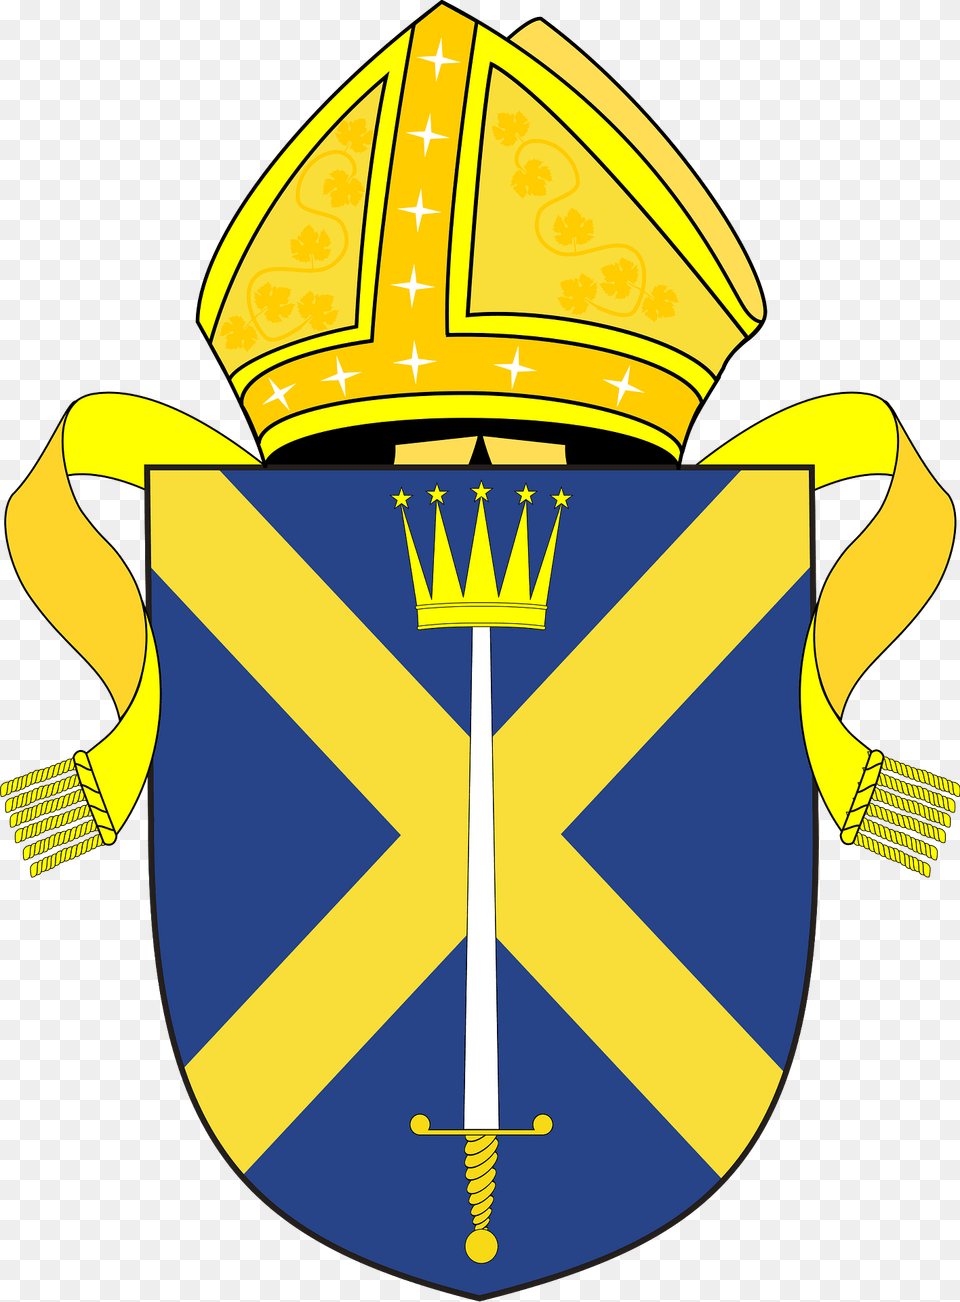 Diocese Of St Albans Arms Clipart, Armor, Shield Png